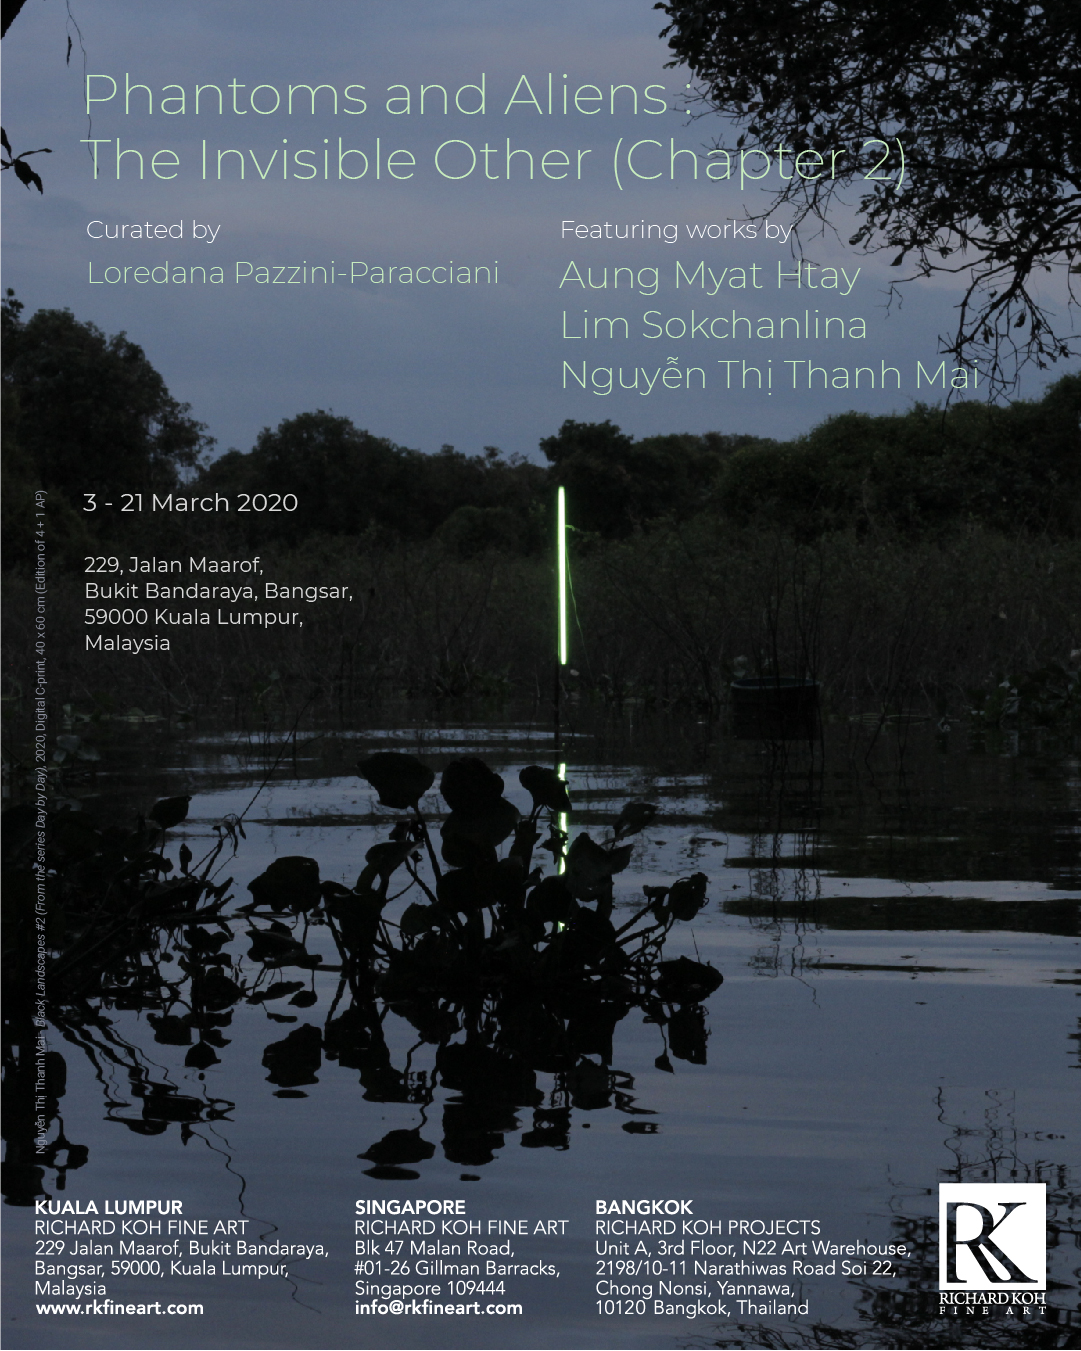   Aung Myat Htay, Lim Sokchanlina & Nguyễn Thị Thanh Mai – Phantoms and Aliens: The Invisible Other (Chapter 2)